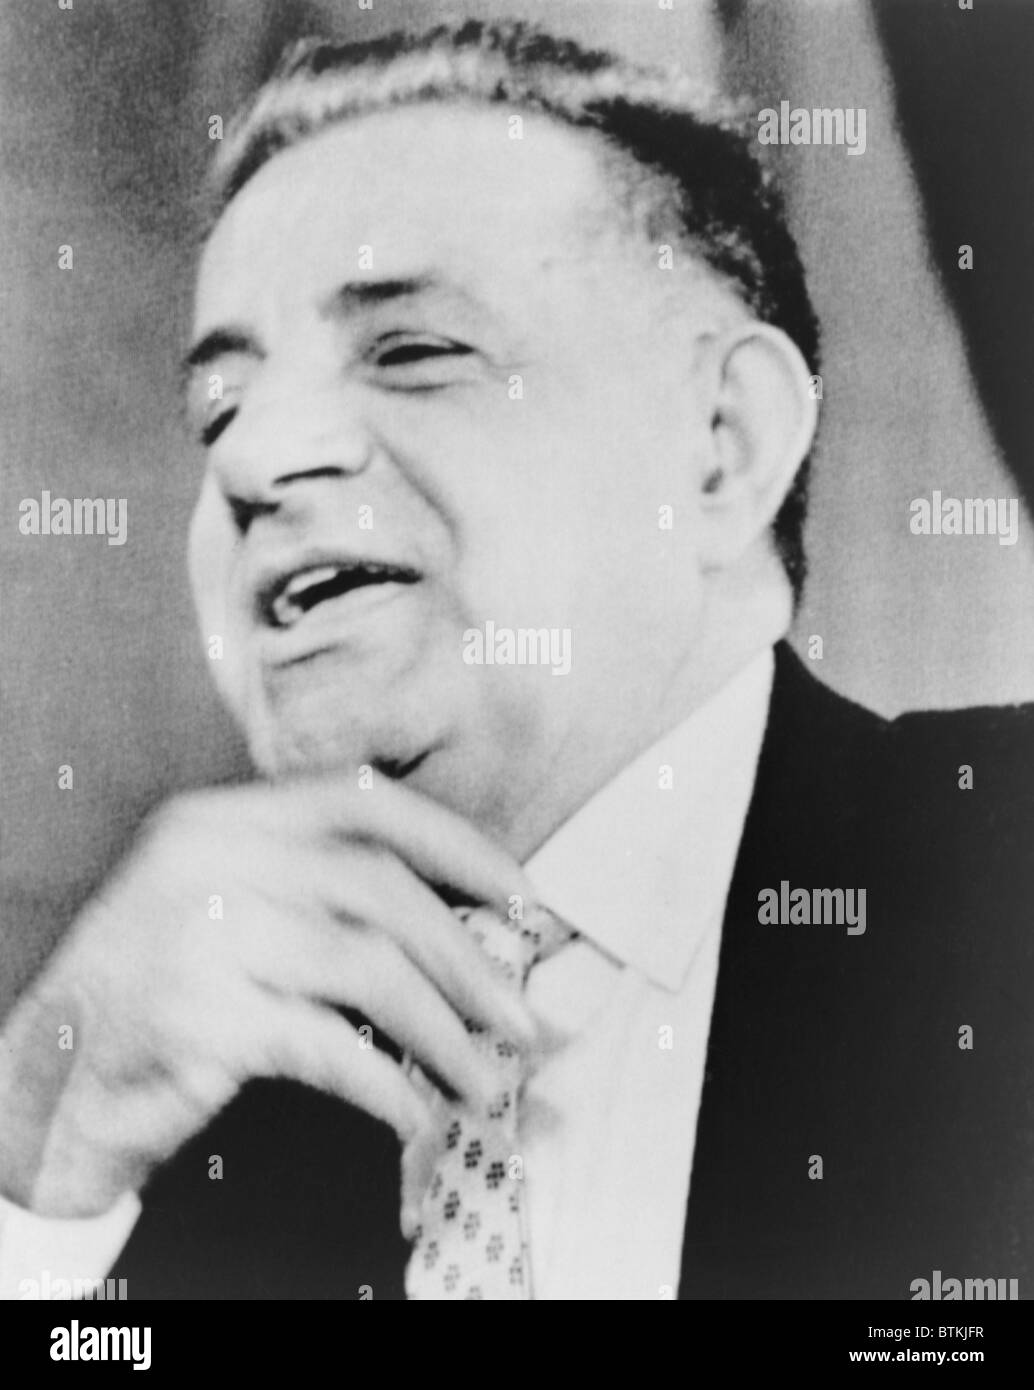 Joseph Valachi, 'singing' during appearance before Senate Investigations subcommittee in 1963. Valachi, a lifelong Mafia insider, provided detailed testimony on Mafia organization, culture, and leaders. Charles Bronson portrayed the gangster in the 1972 movie, THE VALACHI PAPERS. Stock Photo